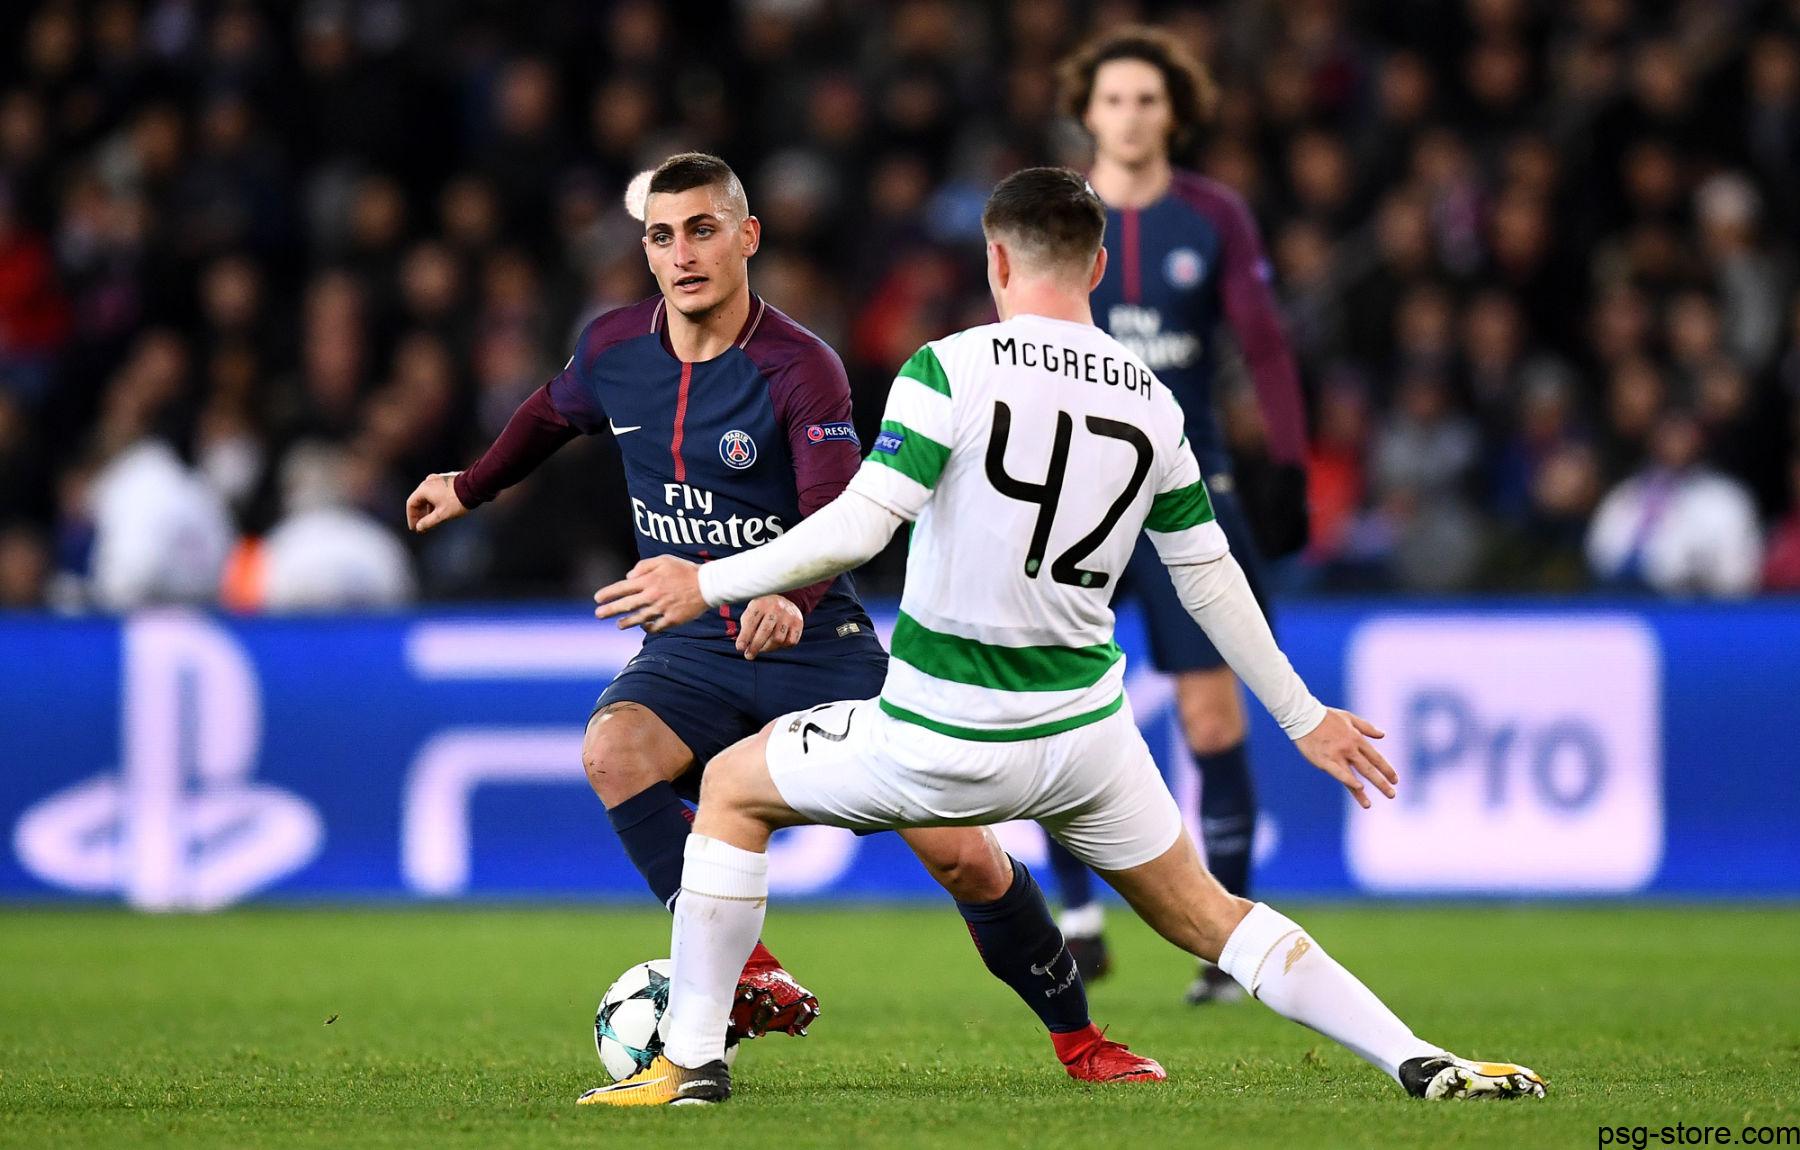 PSG's Resilient Away Victory Against Celtic in the UEFA Champions League